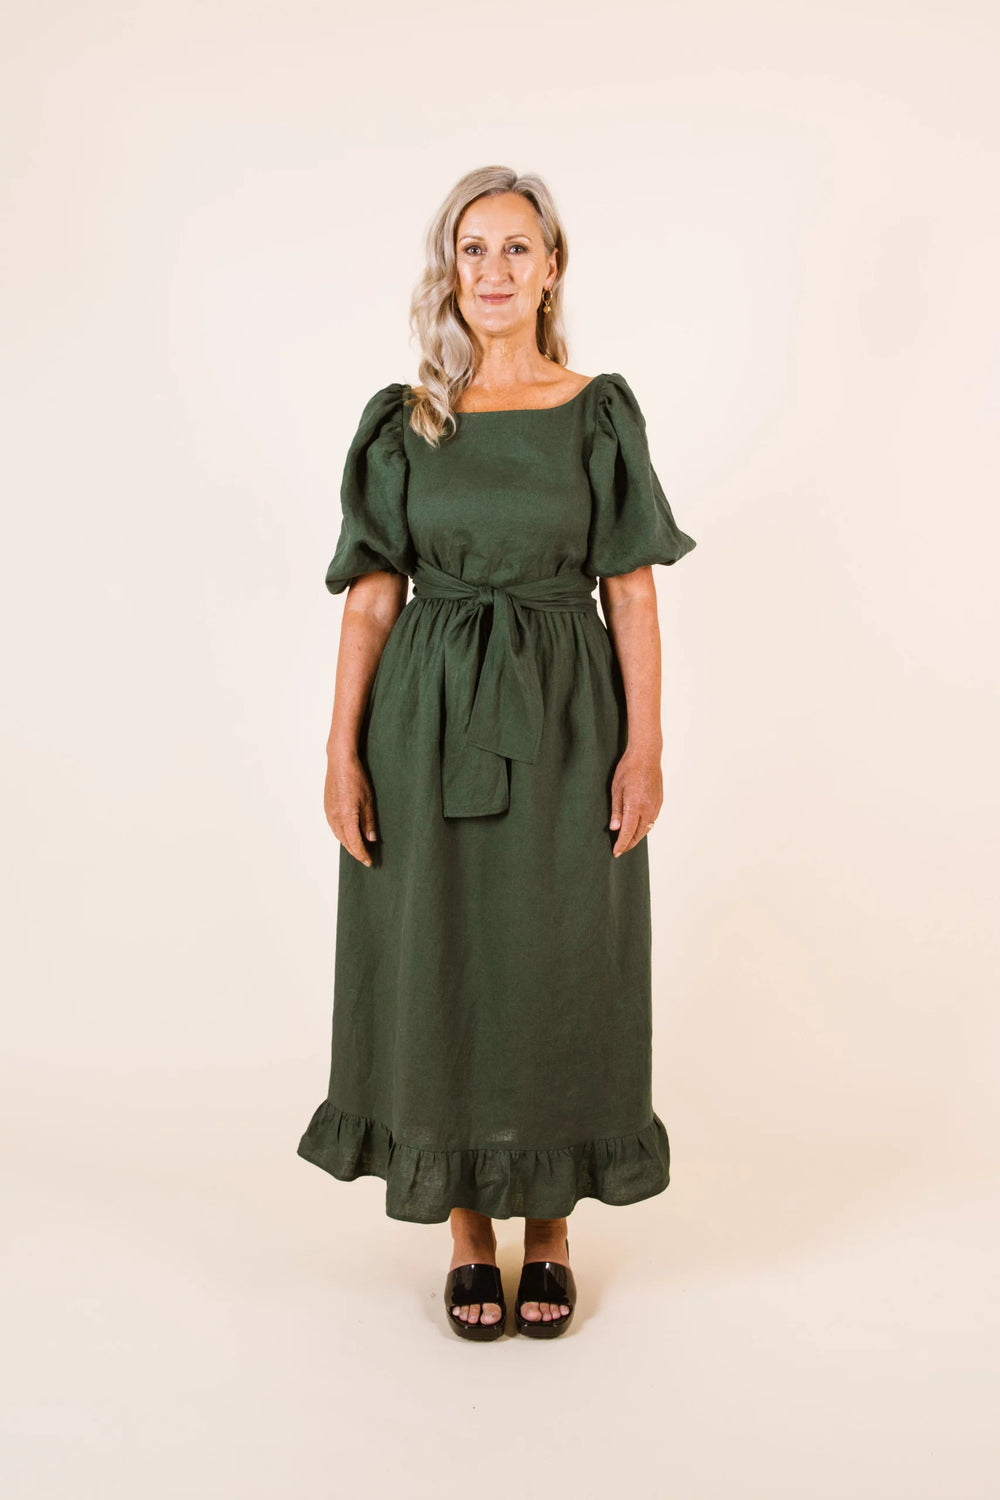 Women wearing the Estella Dress sewing pattern from Papercut Patterns on The Fold Line. A dress pattern made in cotton, linen, silk or rayon fabrics, featuring elbow length puff sleeves, relaxed fit, frilled hem, ankle length, elasticated waist, pockets, 